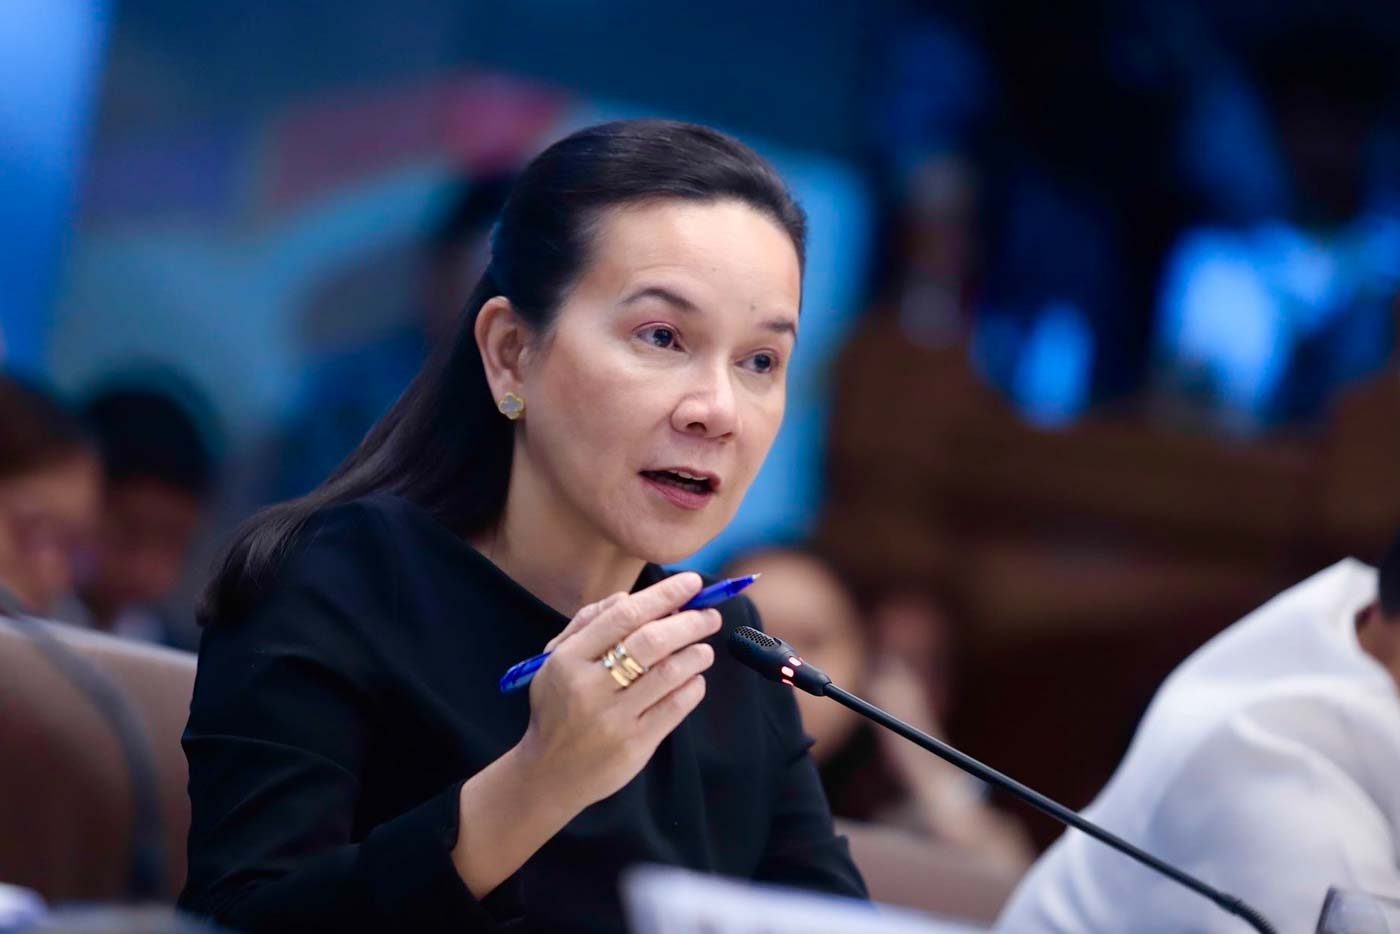 Grace Poe has ‘no plans’ to run for president in 2022